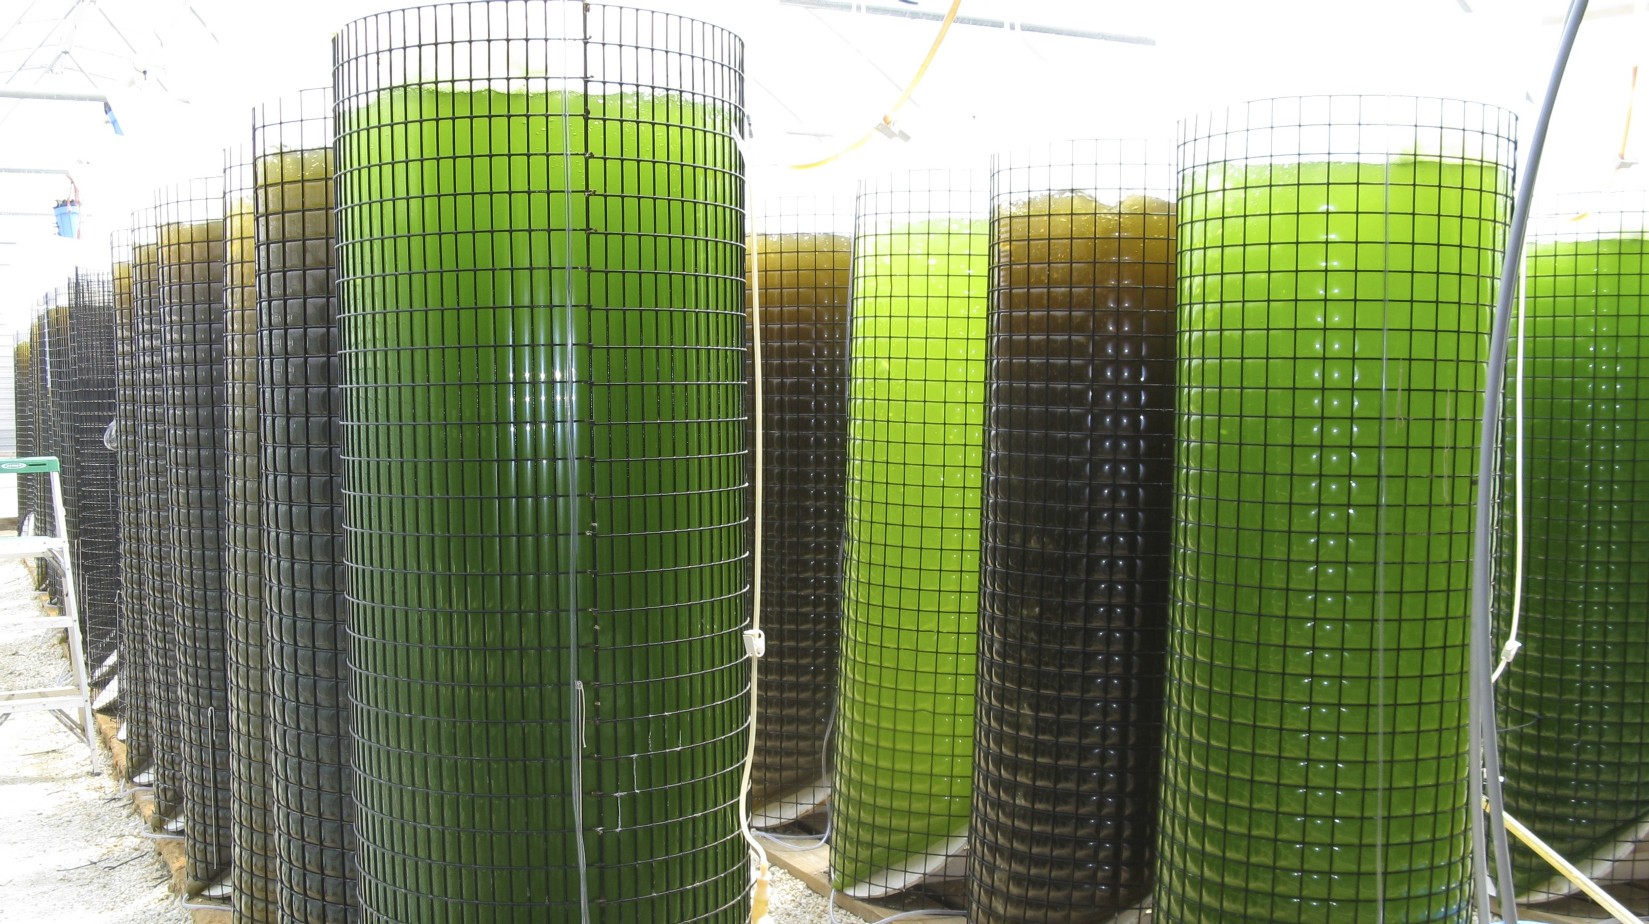 A DIFFERENT SPECIES OF ALGAE CAN BE GROWN IN EACH BIOREACTOR

SEACAPS CONTINUOUS CULTURE PRODUCES A HIGH CONSISTENT NUTRIENT VALUE ALGAE FOR YOUR NEEDS